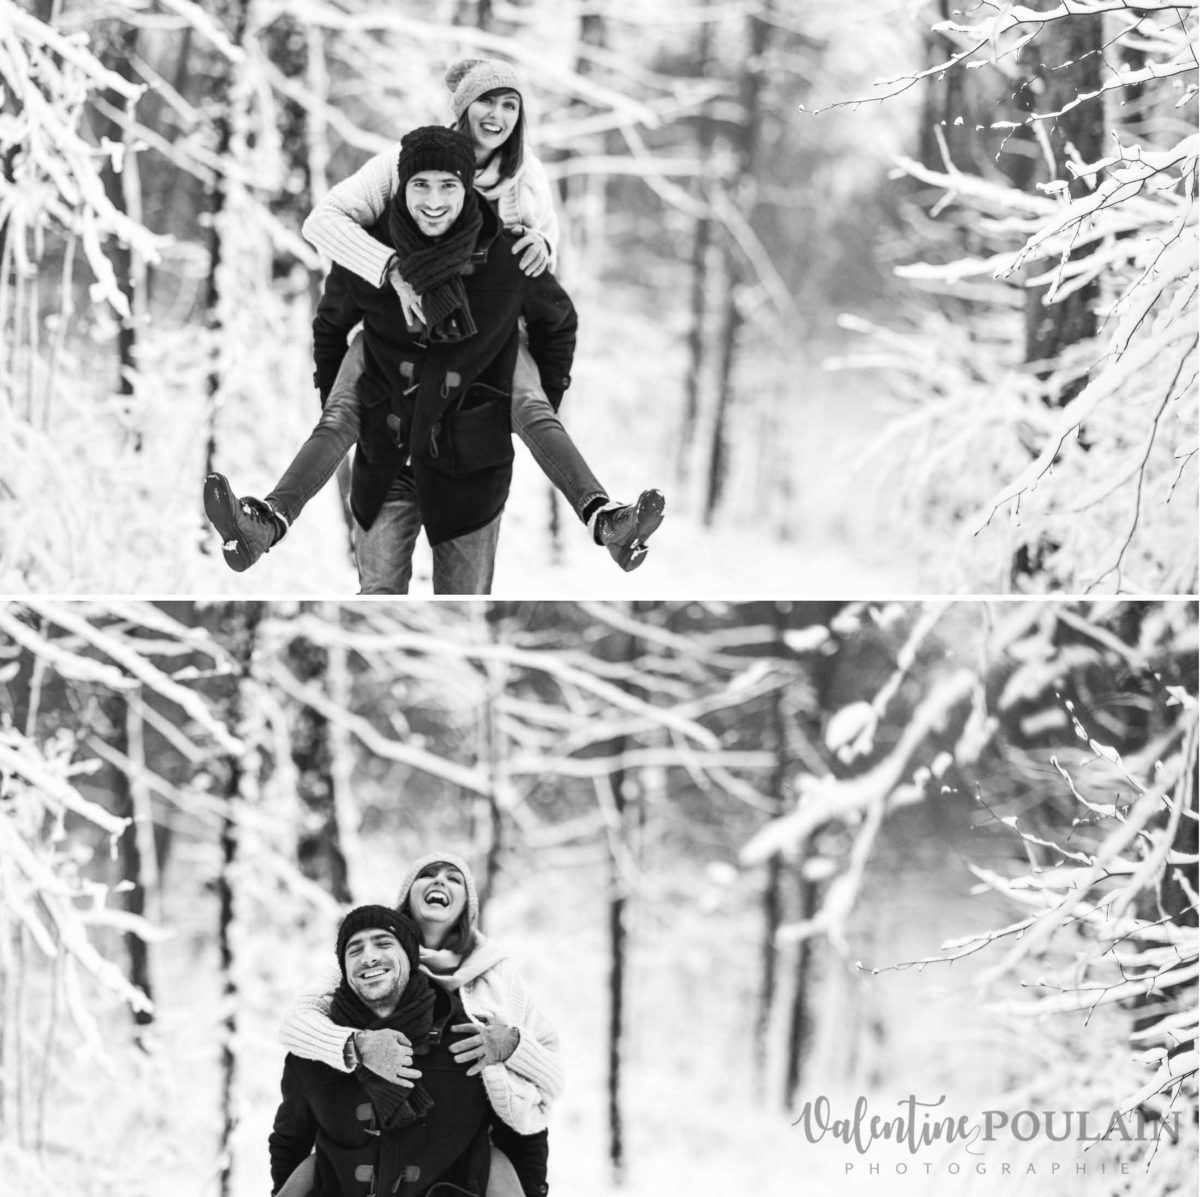 Shooting couple hivernal - Valentine Poulain mdr